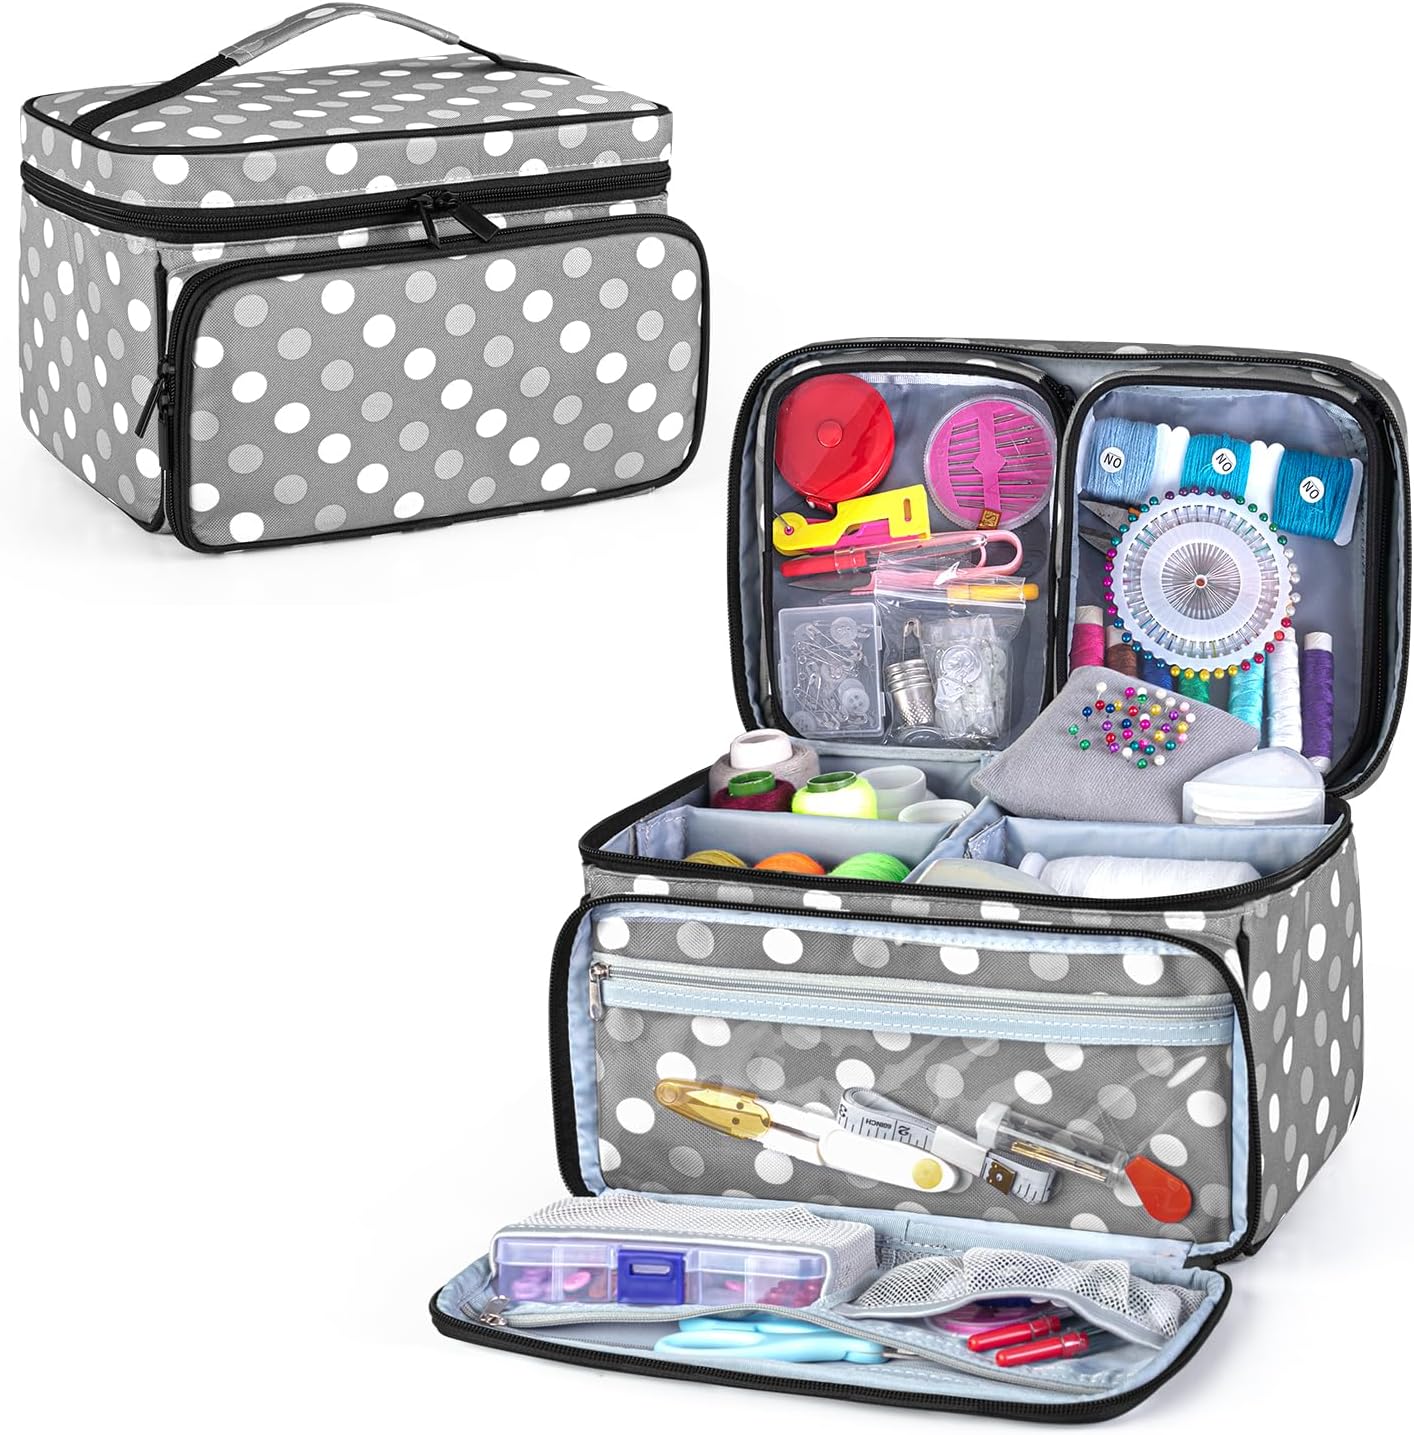 Luxja Sewing Accessories Organizer with 2 Detachable Clear Pockets, Sewing Supplies Organizer (Patent Design), Polka Dots